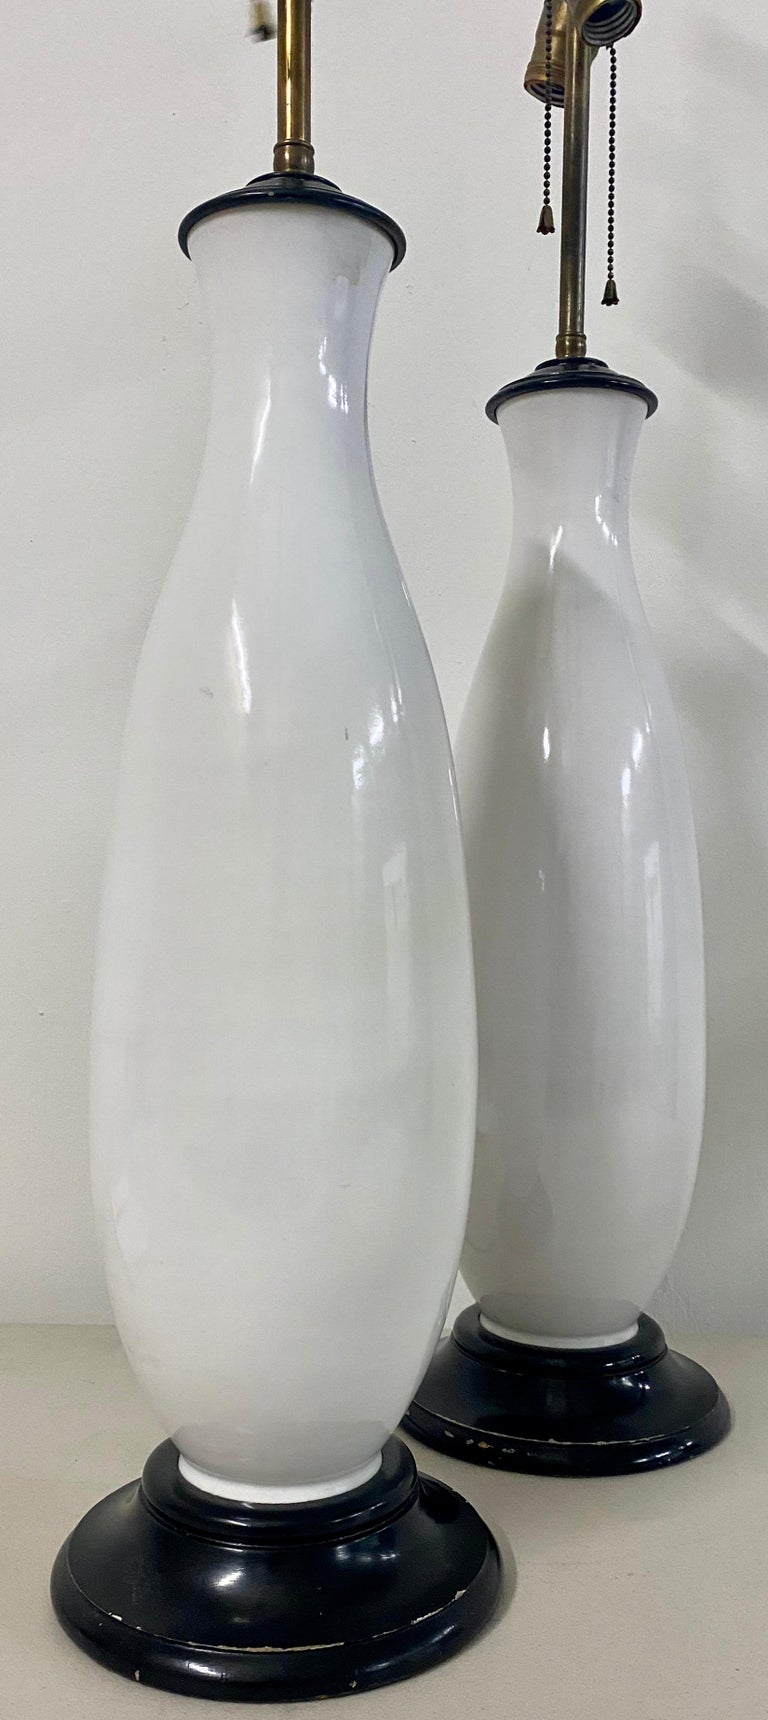 Pair of midcentury white glaze ceramic table lamps, circa 1960.

Wonderful pair or vintage table lamps

7